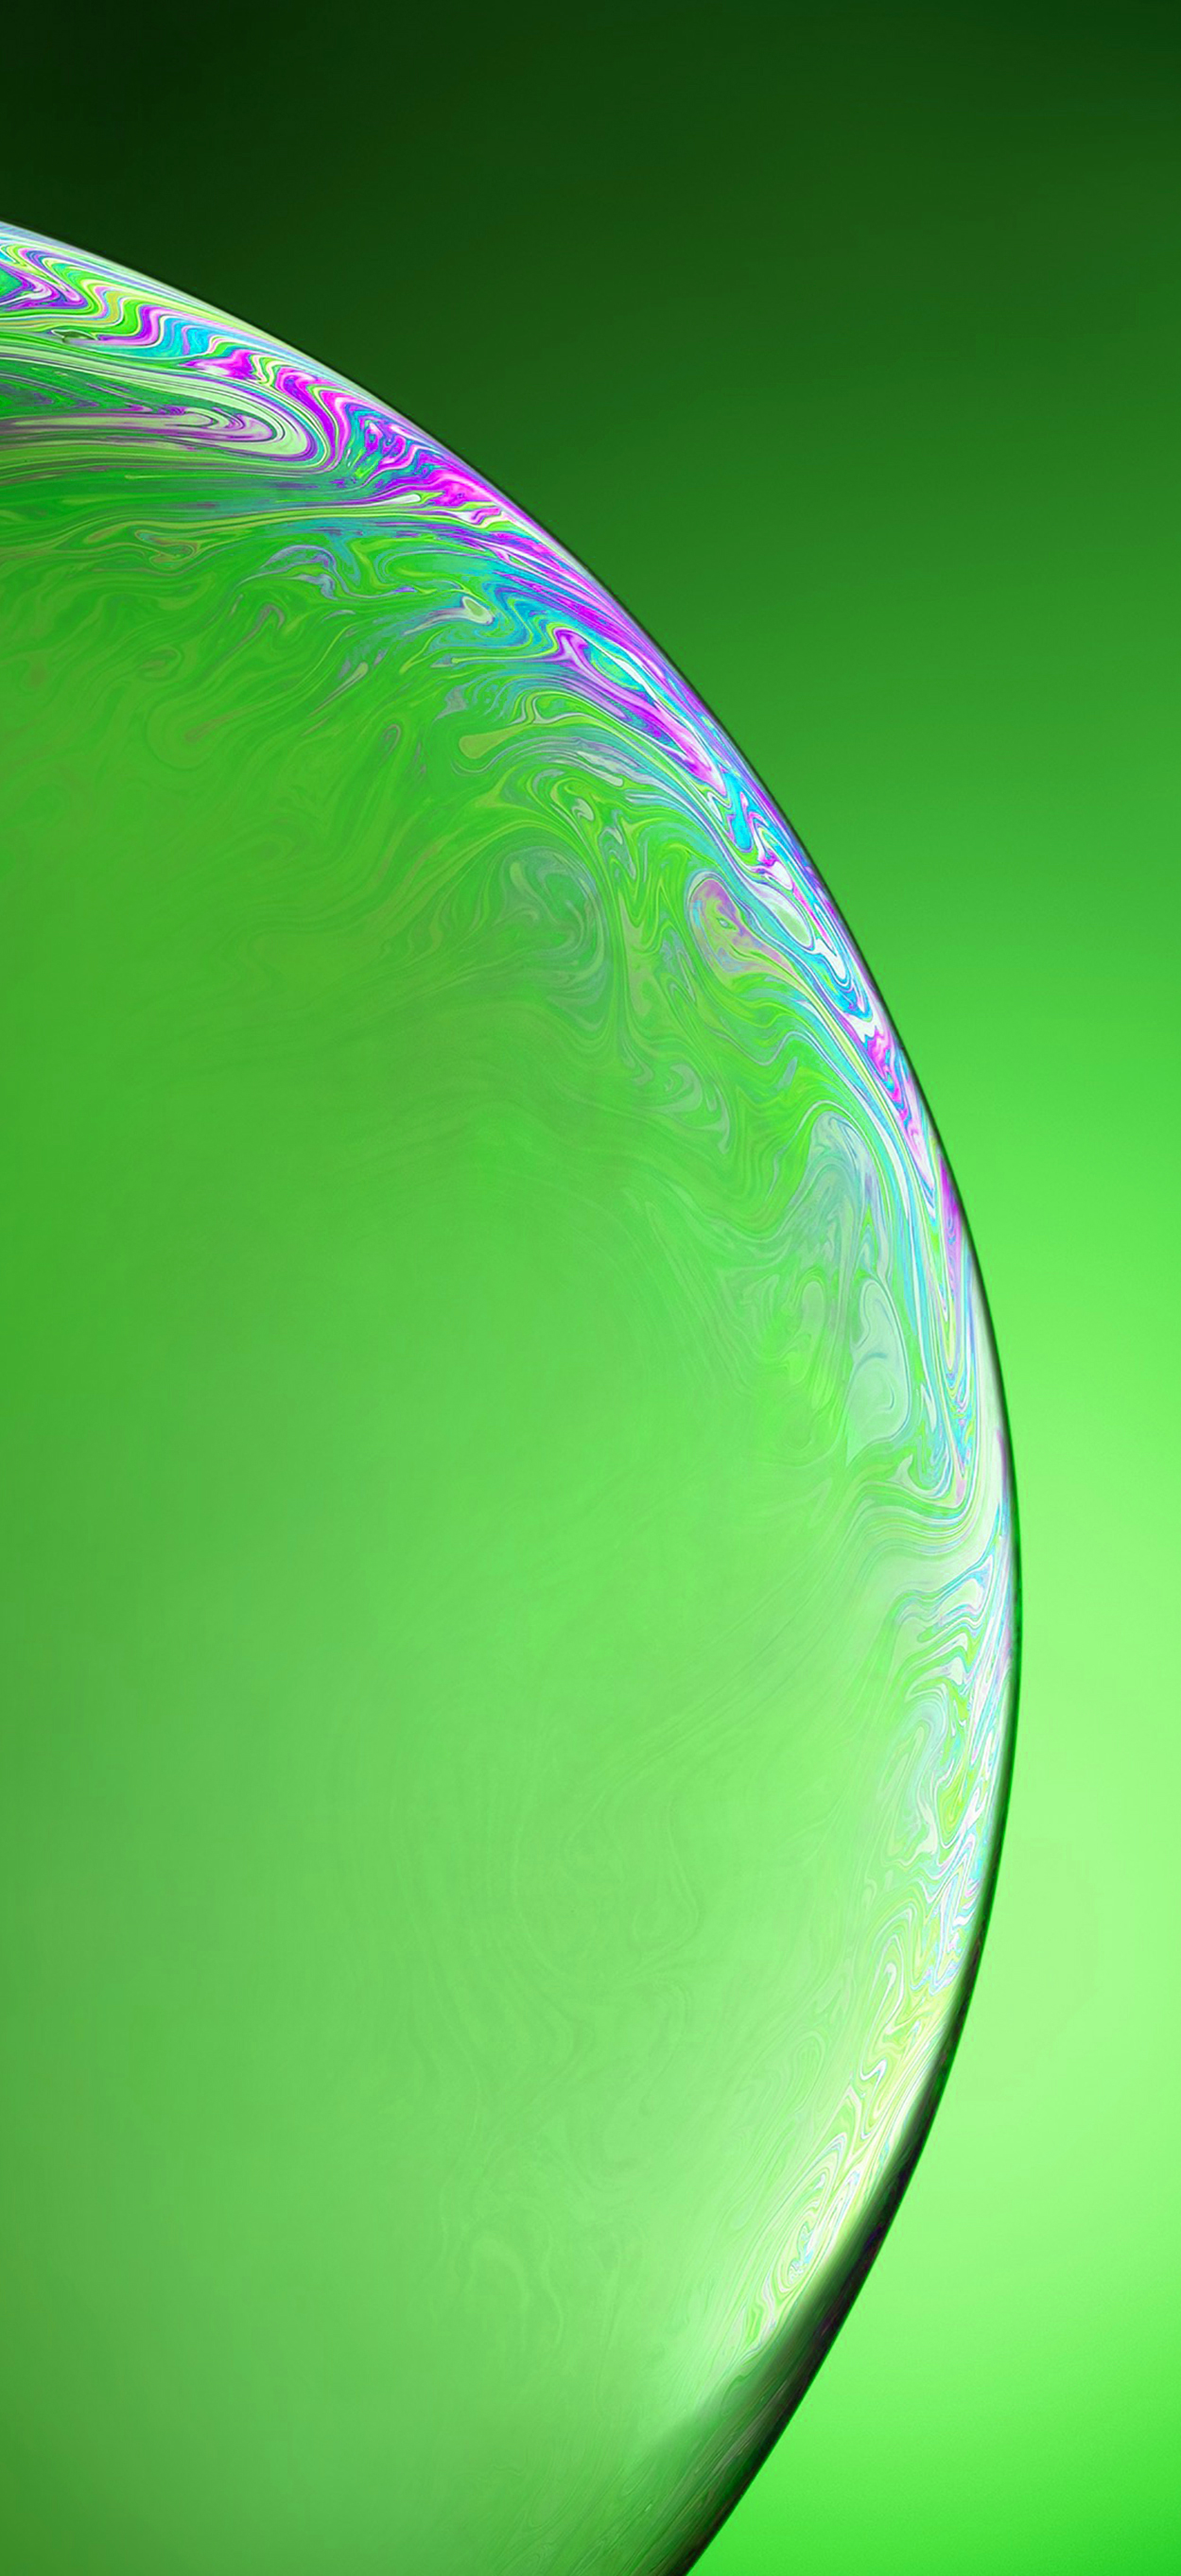 Iphone Xr Bonus 2 The Missing Color Green Wallpapers Central